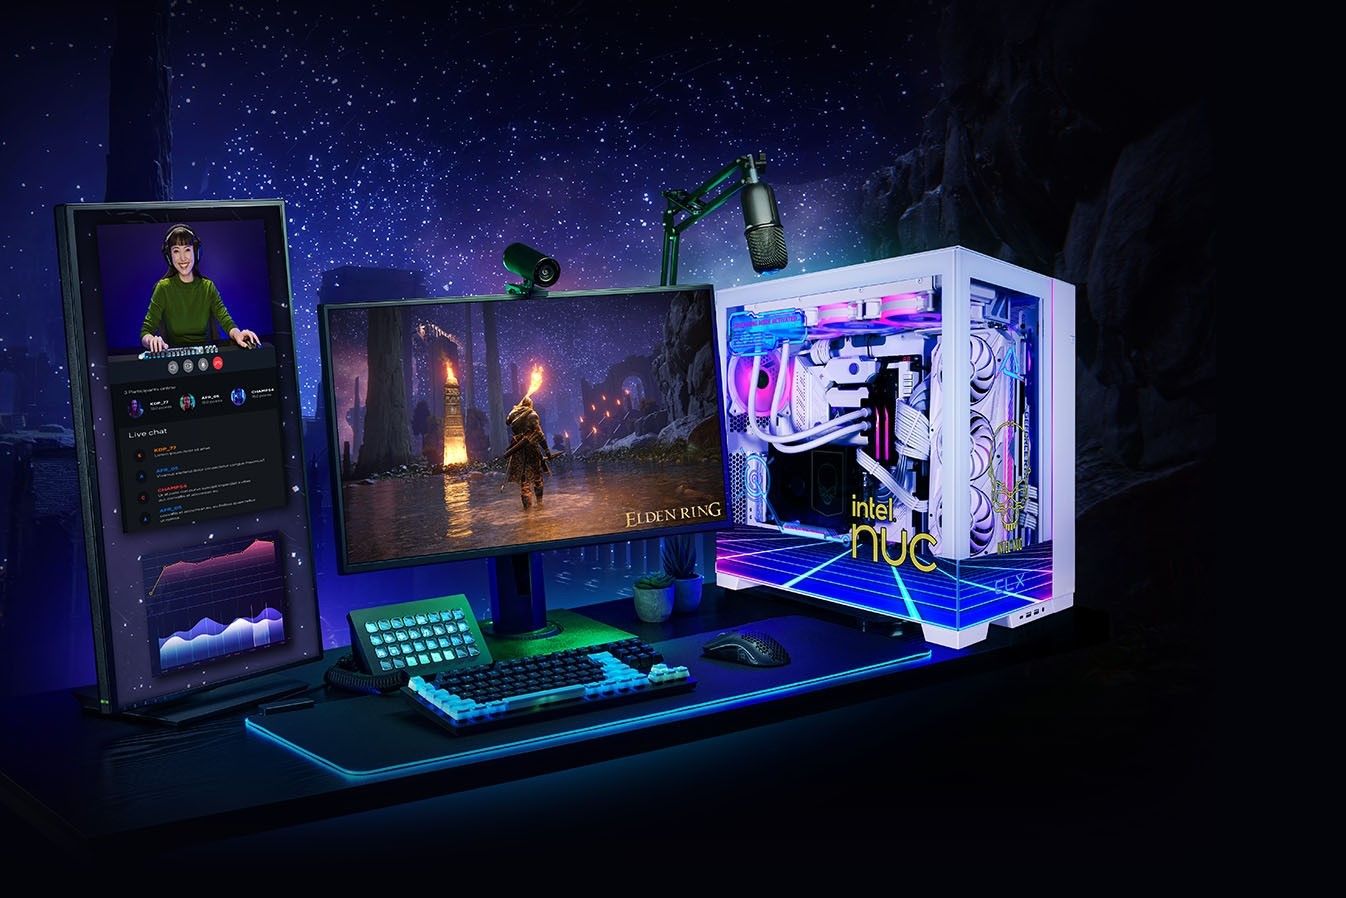 A CLX Hathor gaming desktop alongside various peripherals including two monitors, one of which is vertical, plus a keyboard, mouse, microphone and webcam.